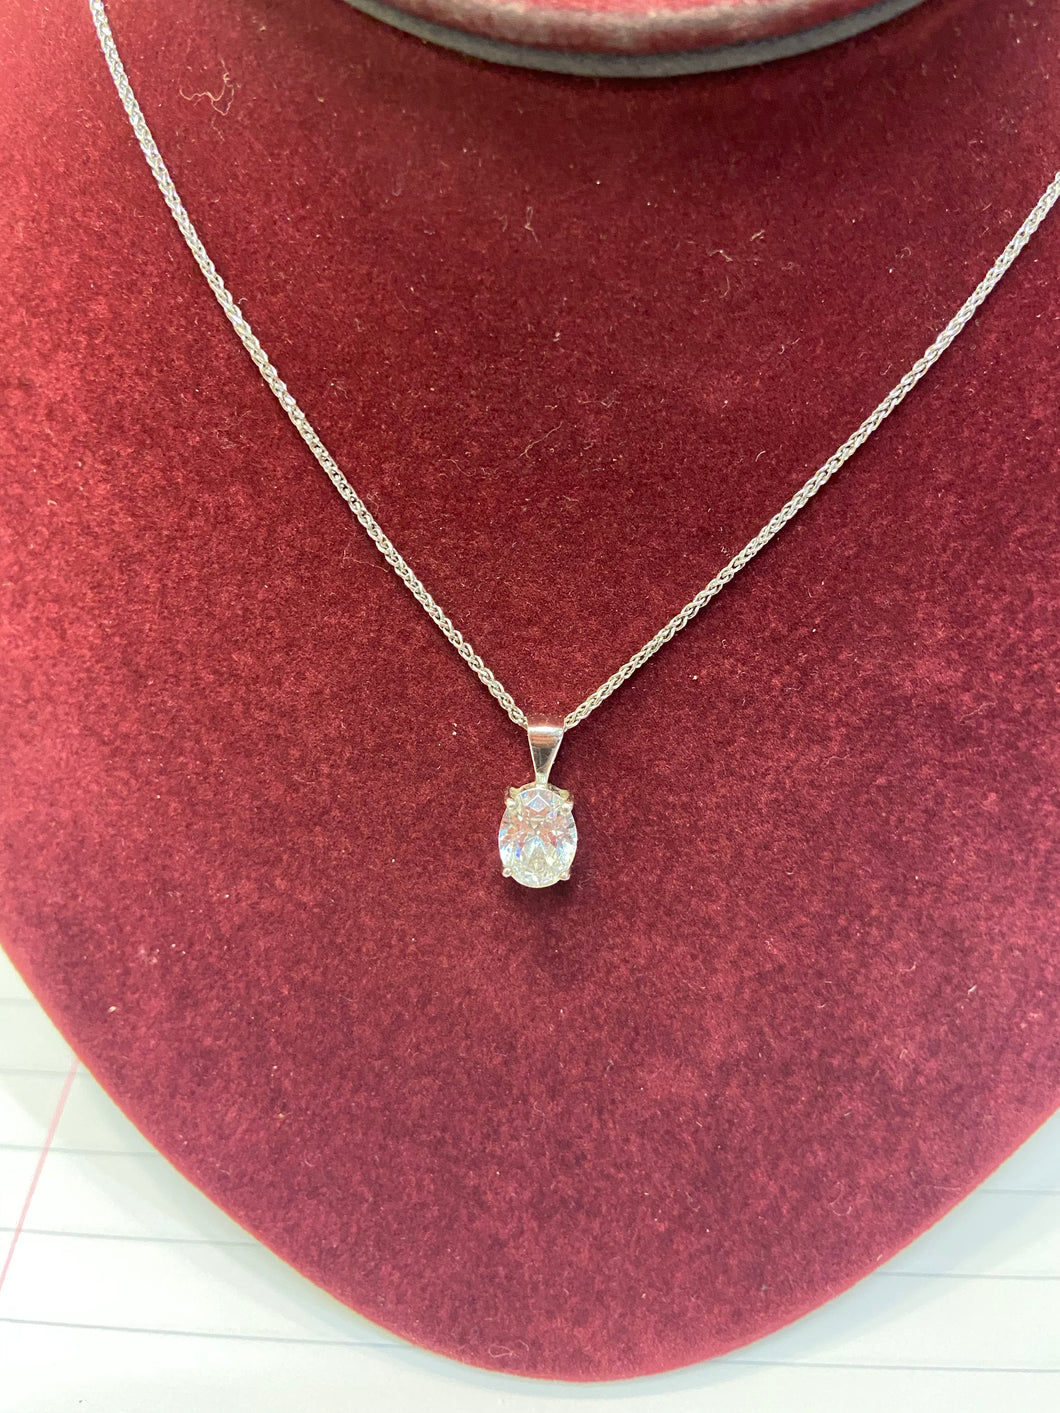 9ct White Gold Oval Solitaire Pendant & Chain